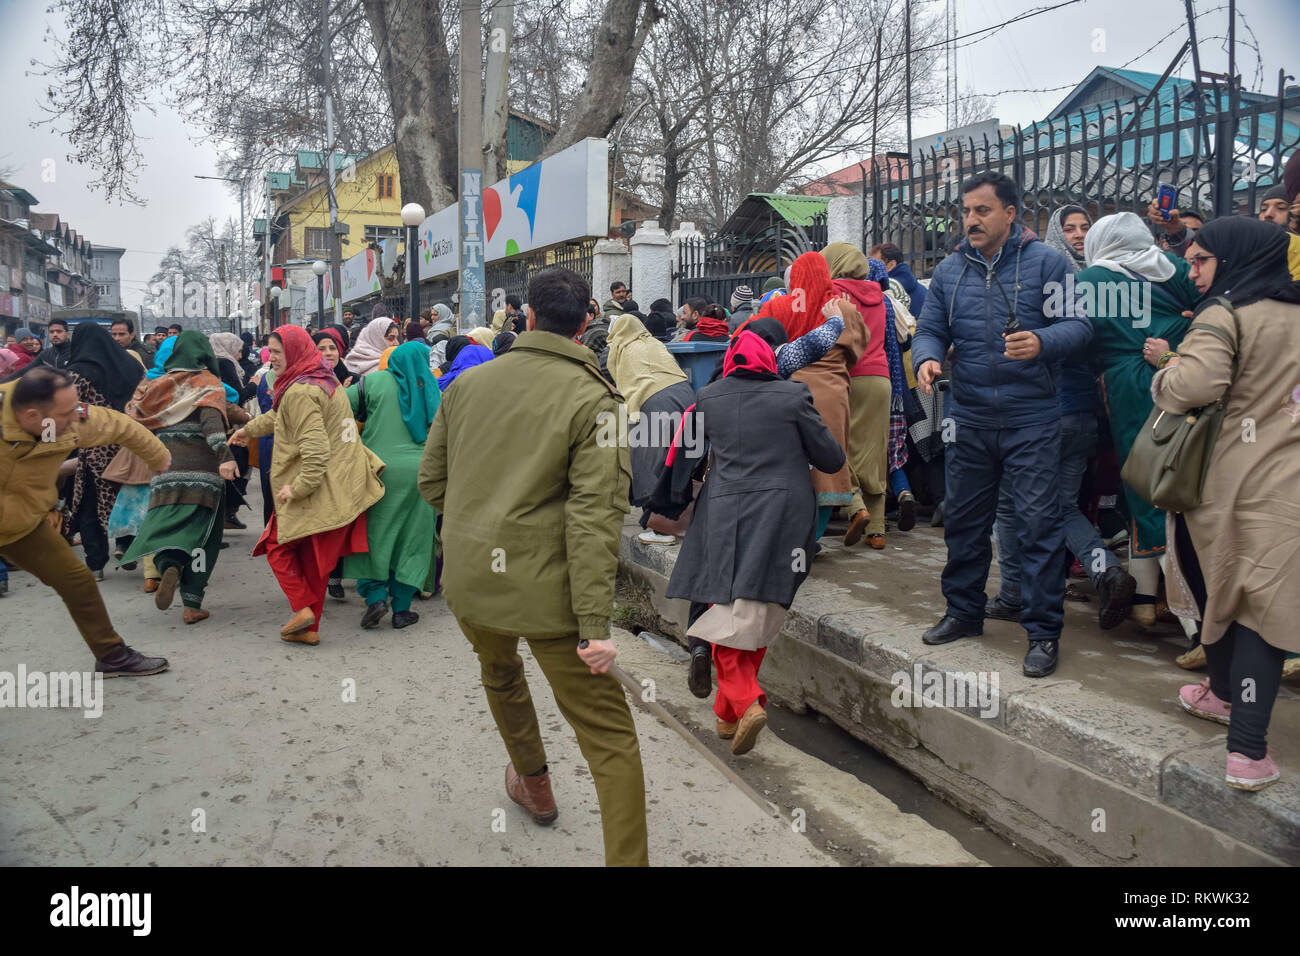 February 12, 2019 - Srinagar, Jammu & Kashmir - Members of Jammu and Kashmir police are seen charging batons over the NHM employees during protest in Srinagar.NHM (National Health Mission) employees on took out an anti-government protest march towards the Raj Bhavan in Srinagar. The employees who have been on a strike since the past thirty days are demanding regularization in a phased manner, equal pay for equal work and other social security benefits. Police used batons on the Protesters and many of them were detained during the protest. (Credit Image: © Idrees Abbas/SOPA Images via Z Stock Photo